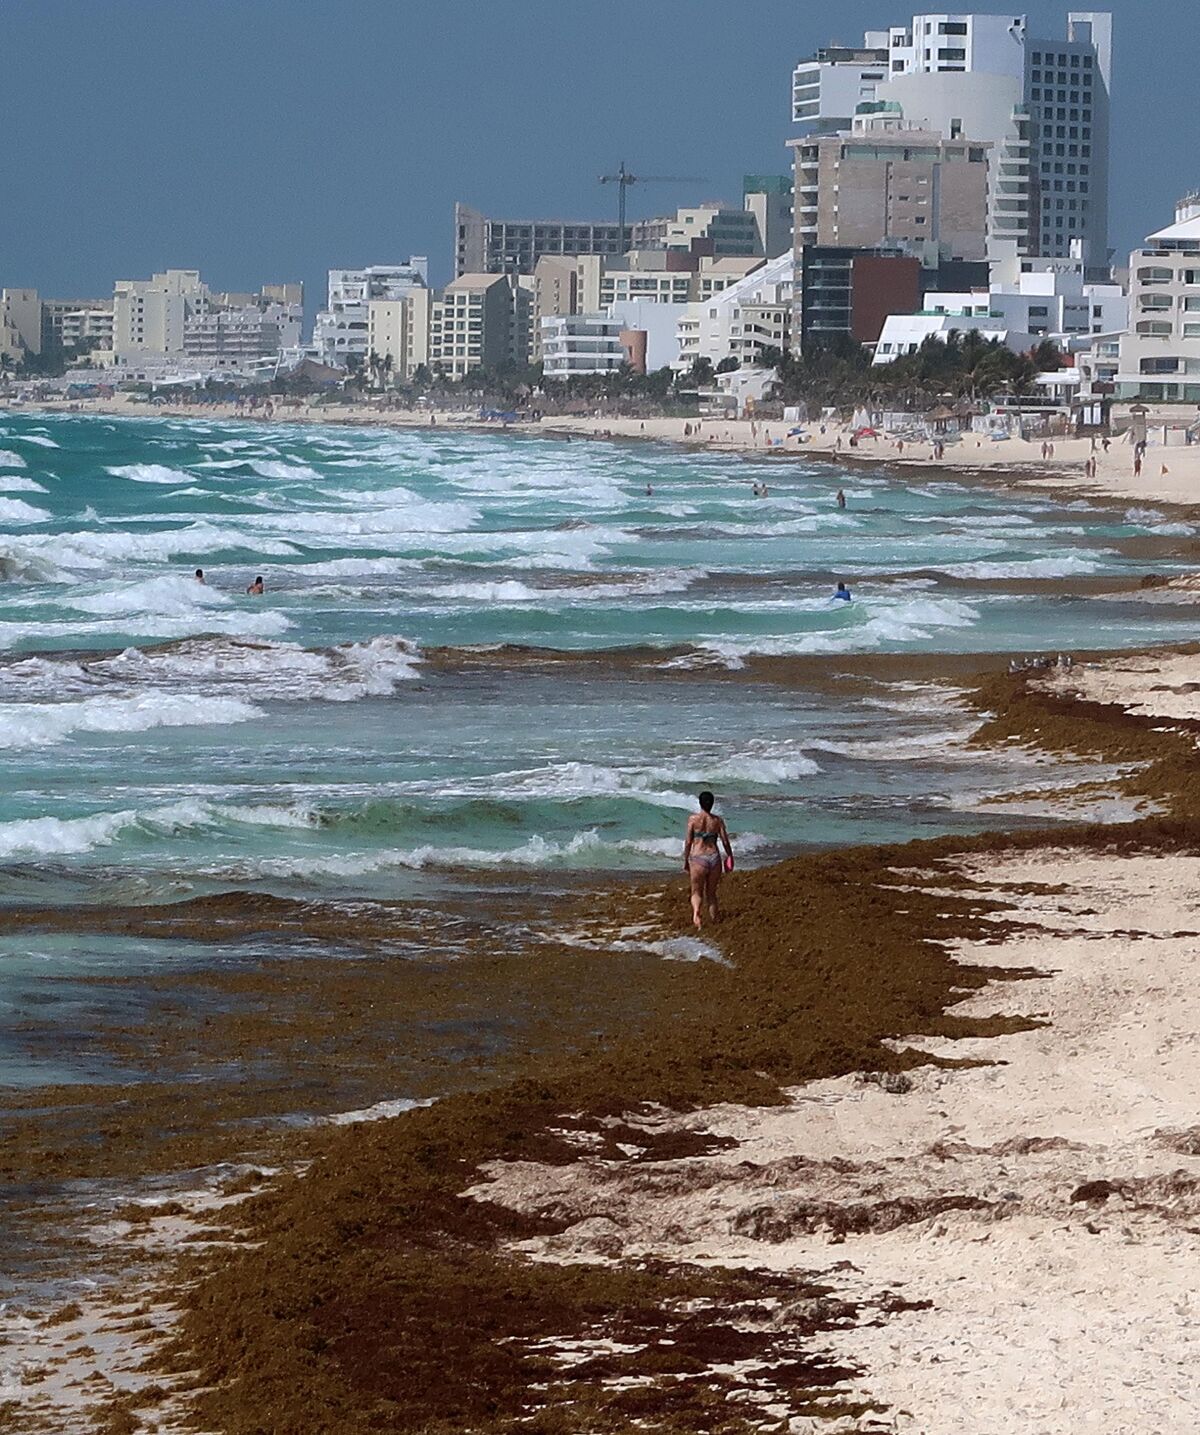 Mexico: Seaweed buildup on Caribbean beaches affecting tourism